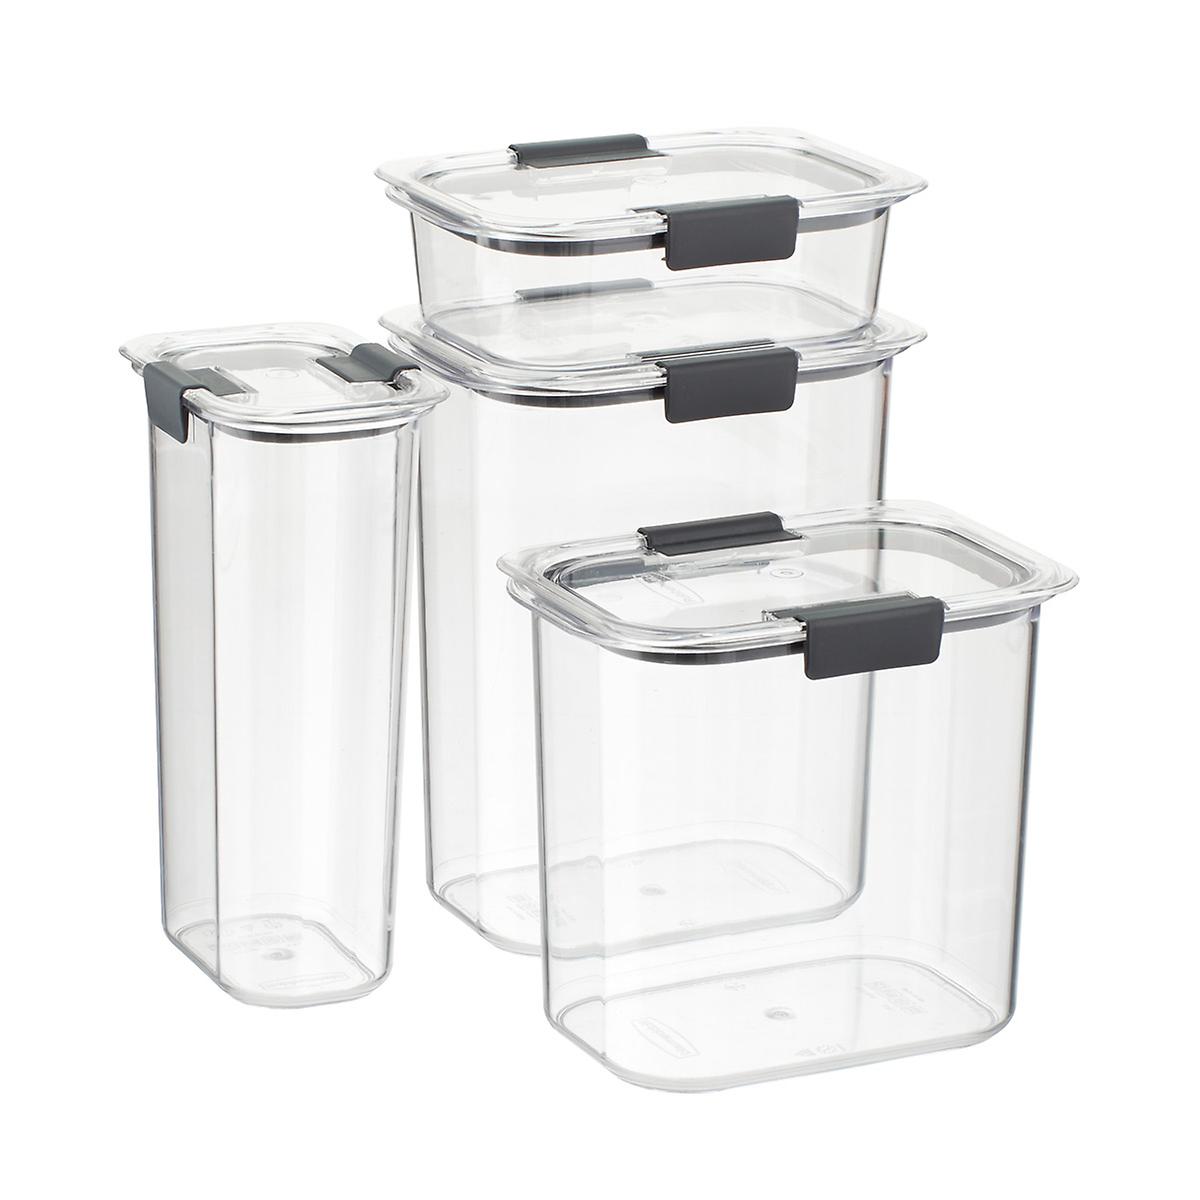 Rubbermaid Brilliance Pantry Canisters